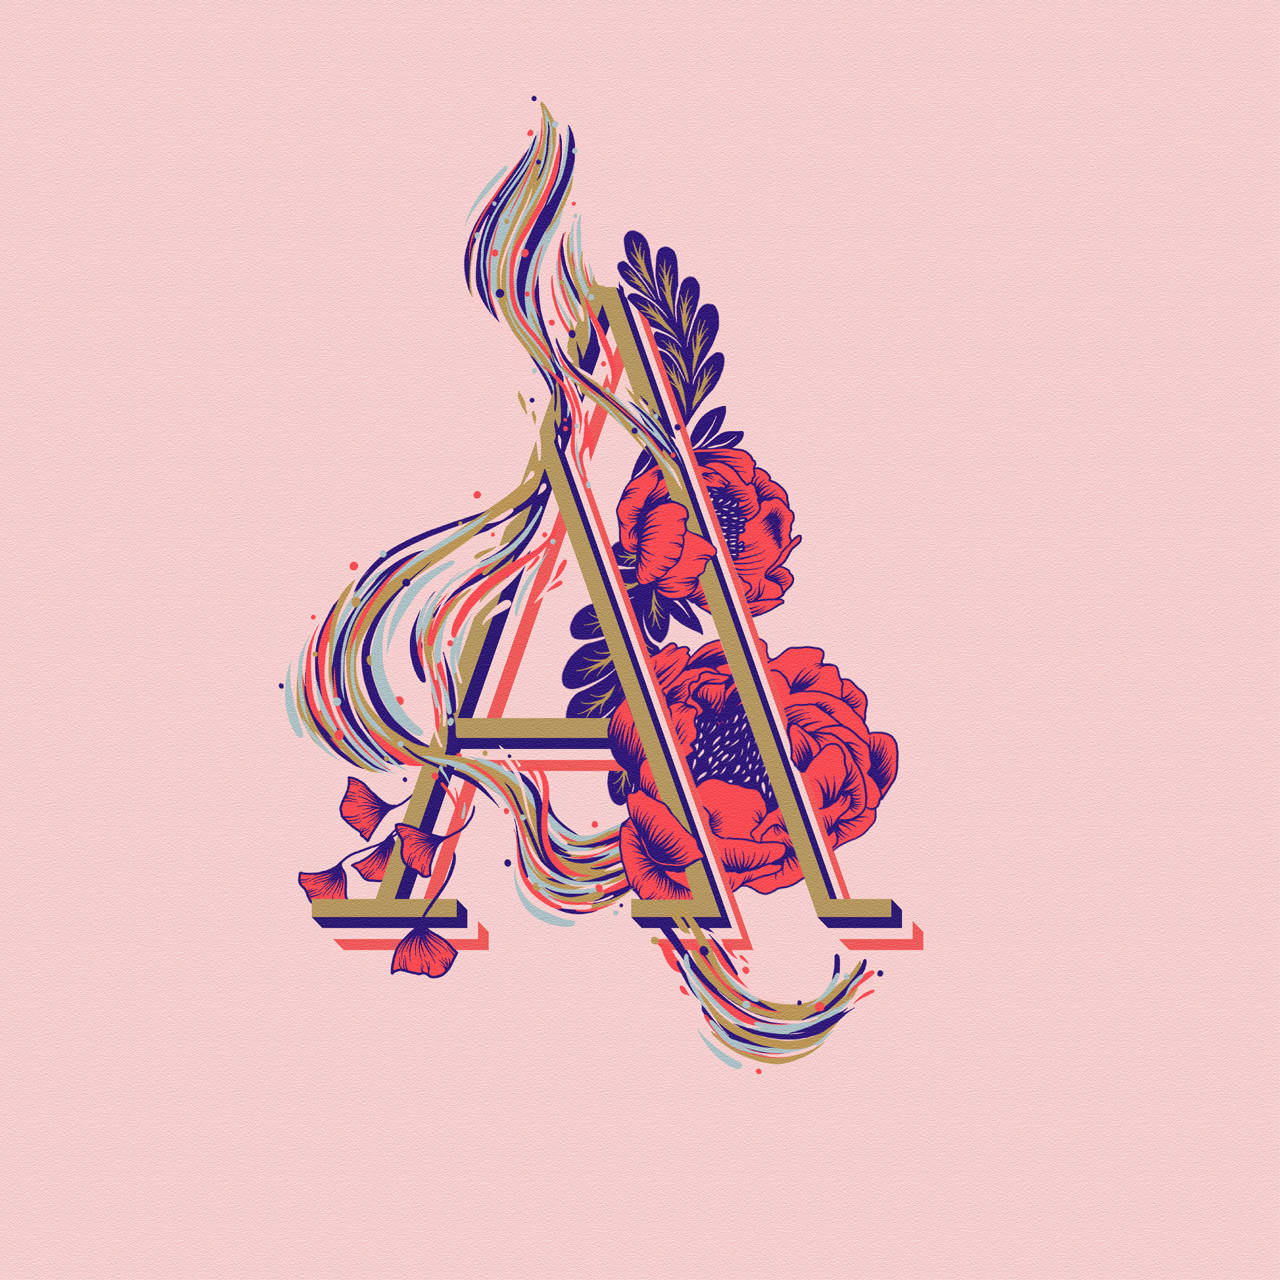 Capital Alphabet Letter A With Flowing Effect And Flowers Picture